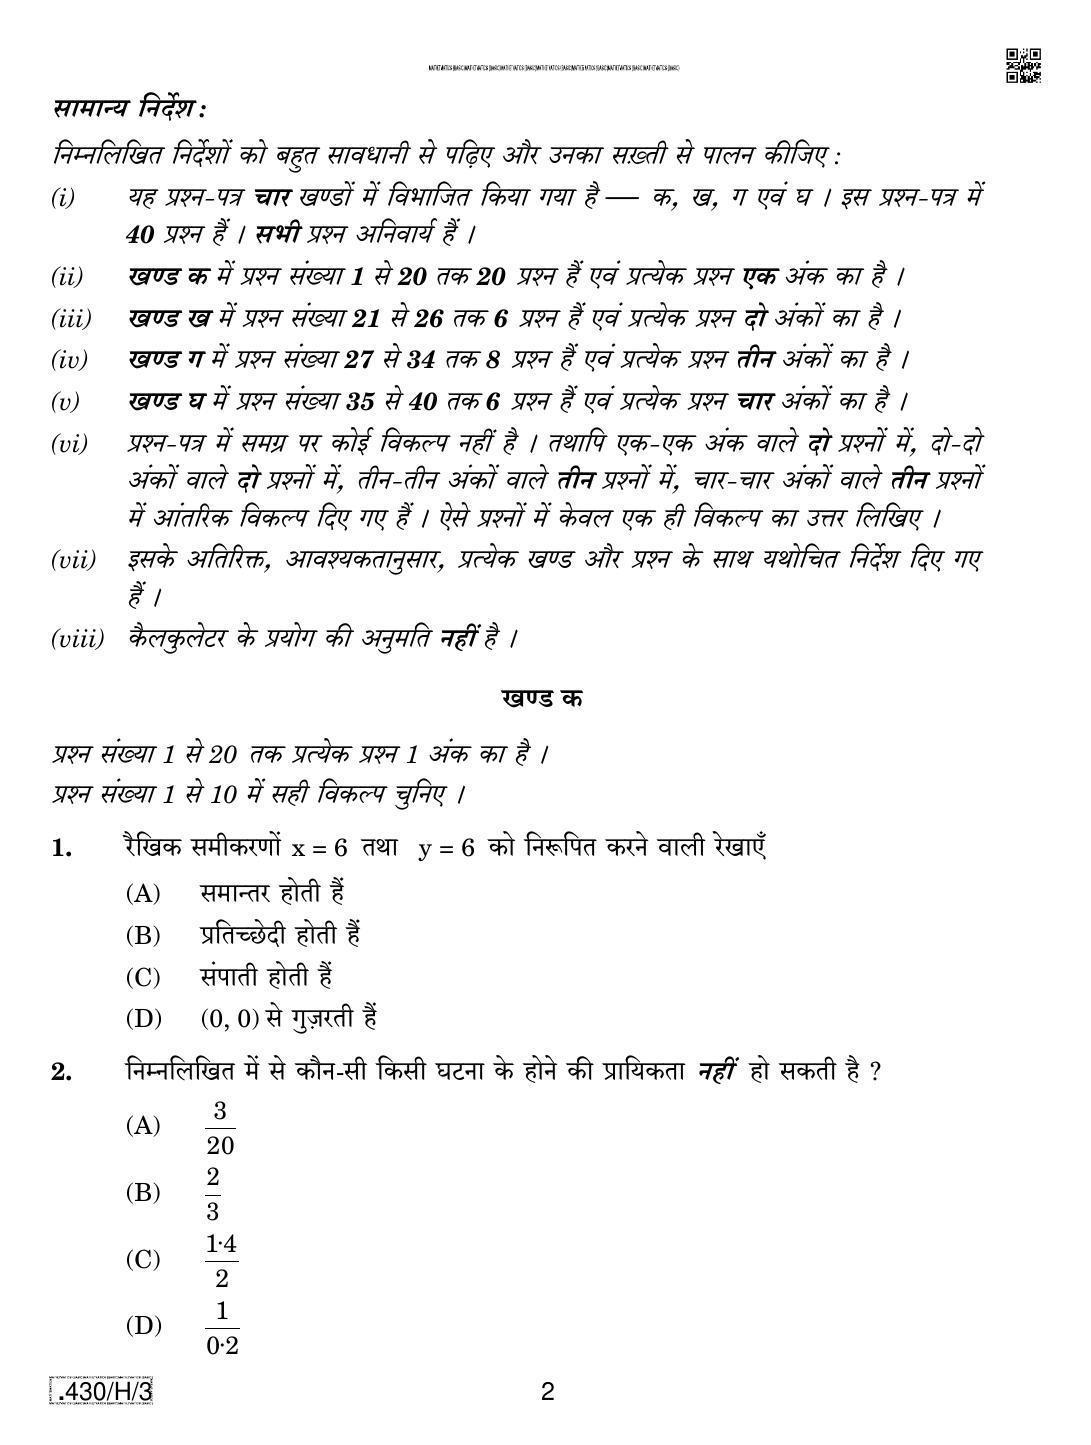 CBSE Class 10 430-C-3 - Maths (Basic) 2020 Compartment Question Paper - Page 2